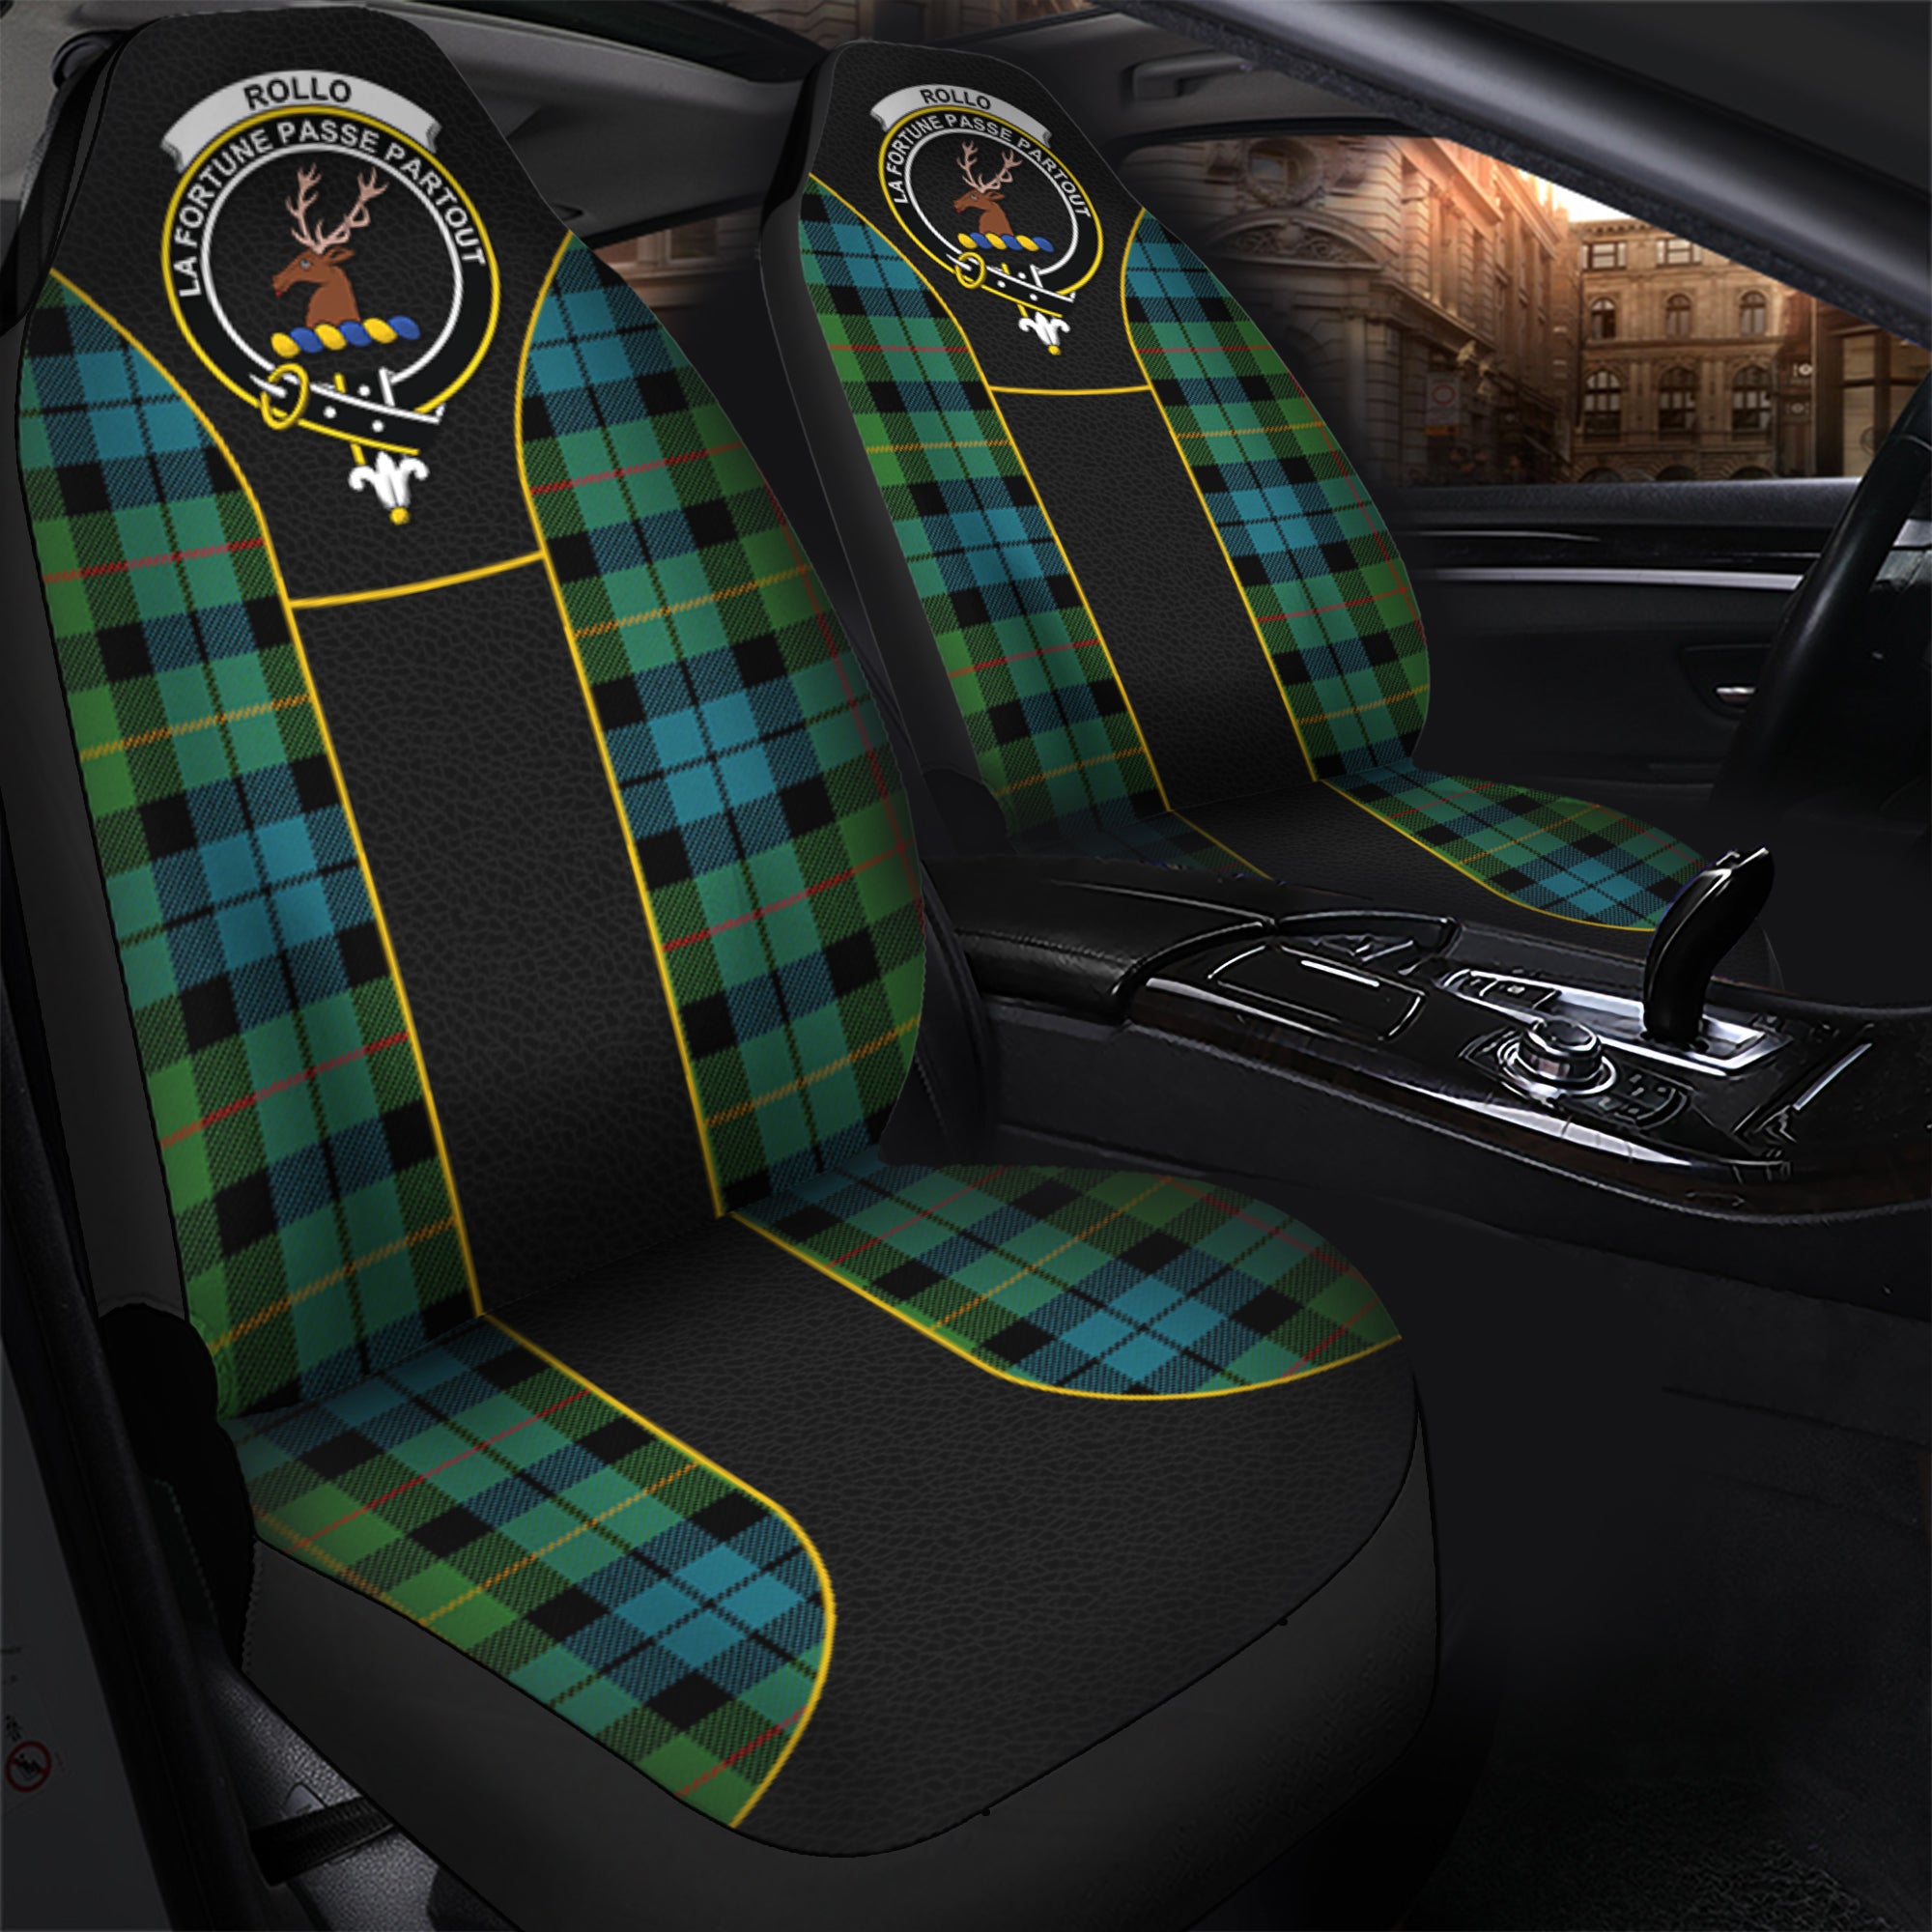 scottish-rollo-ancient-tartan-crest-car-seat-cover-special-style